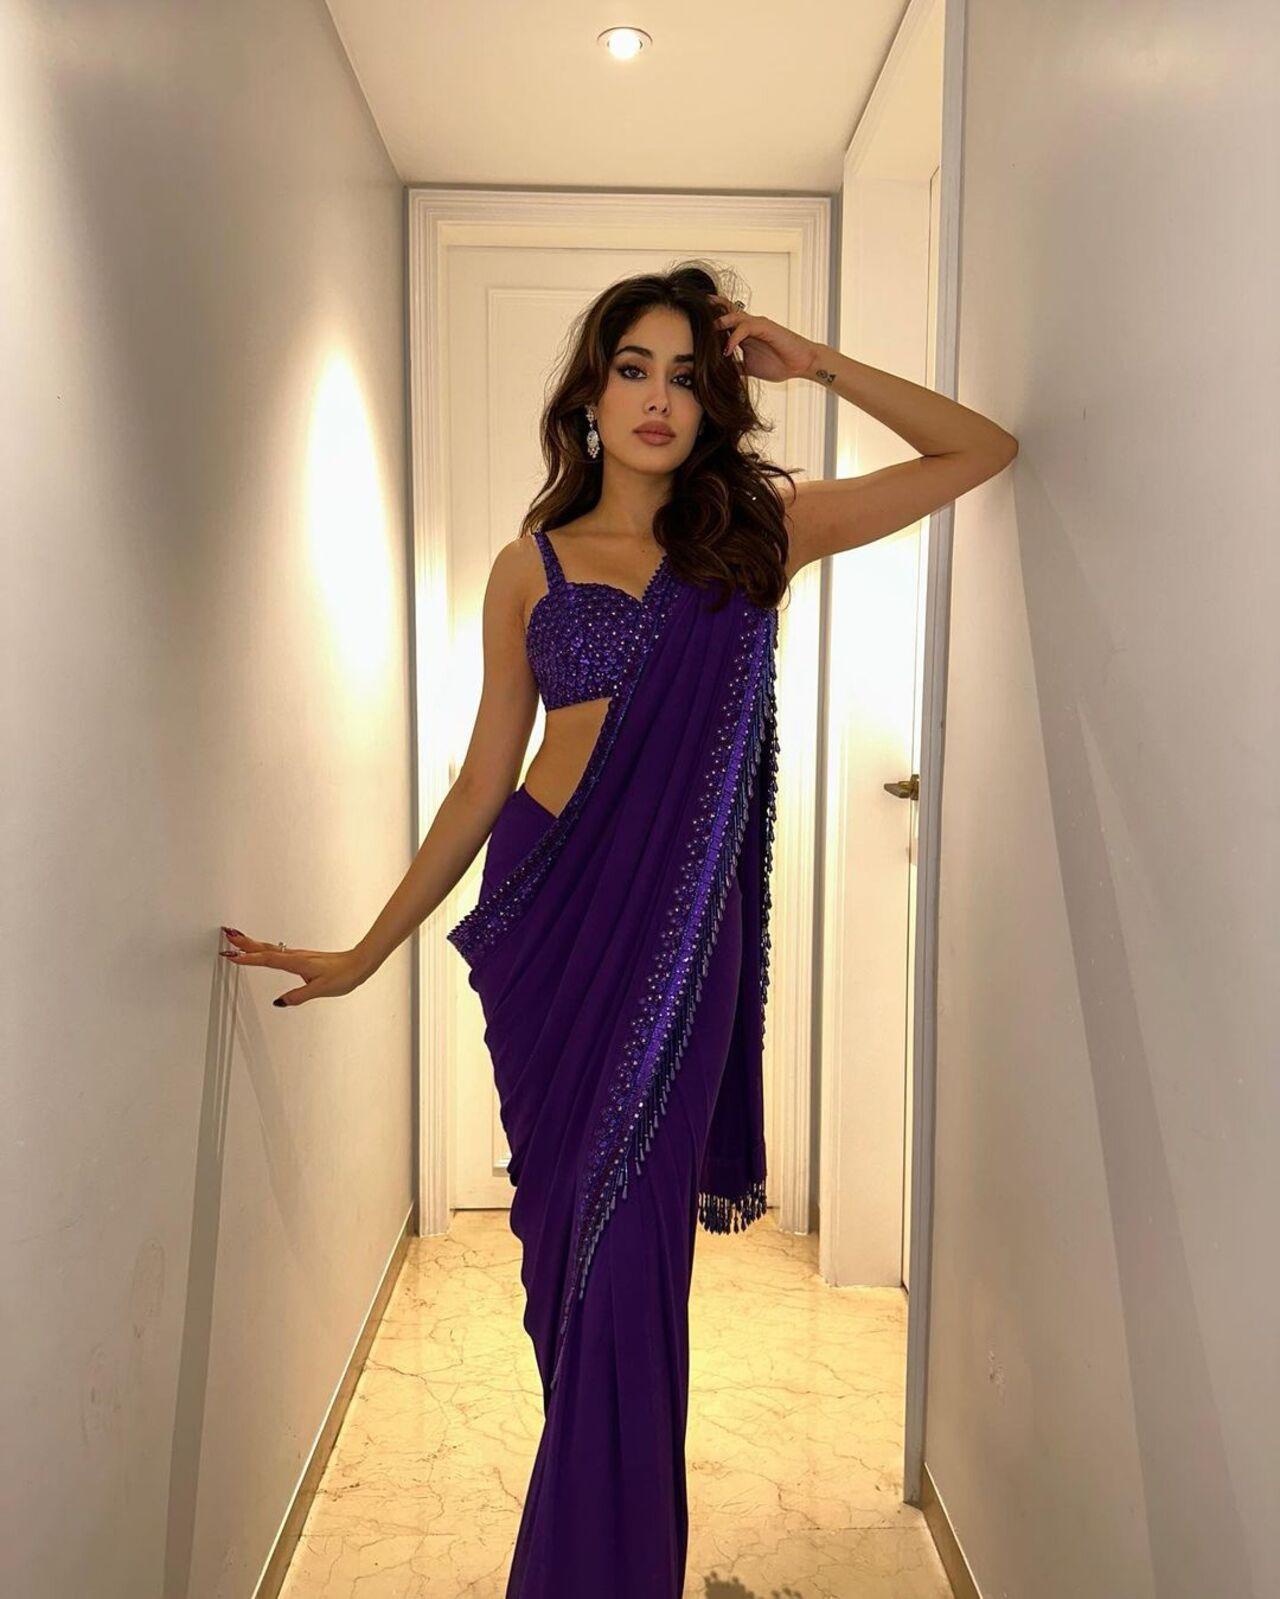 Janhvi Kapoor wore a deep blue sequinned saree for a Diwali party. The actress revealed in a post that she did her own makeup